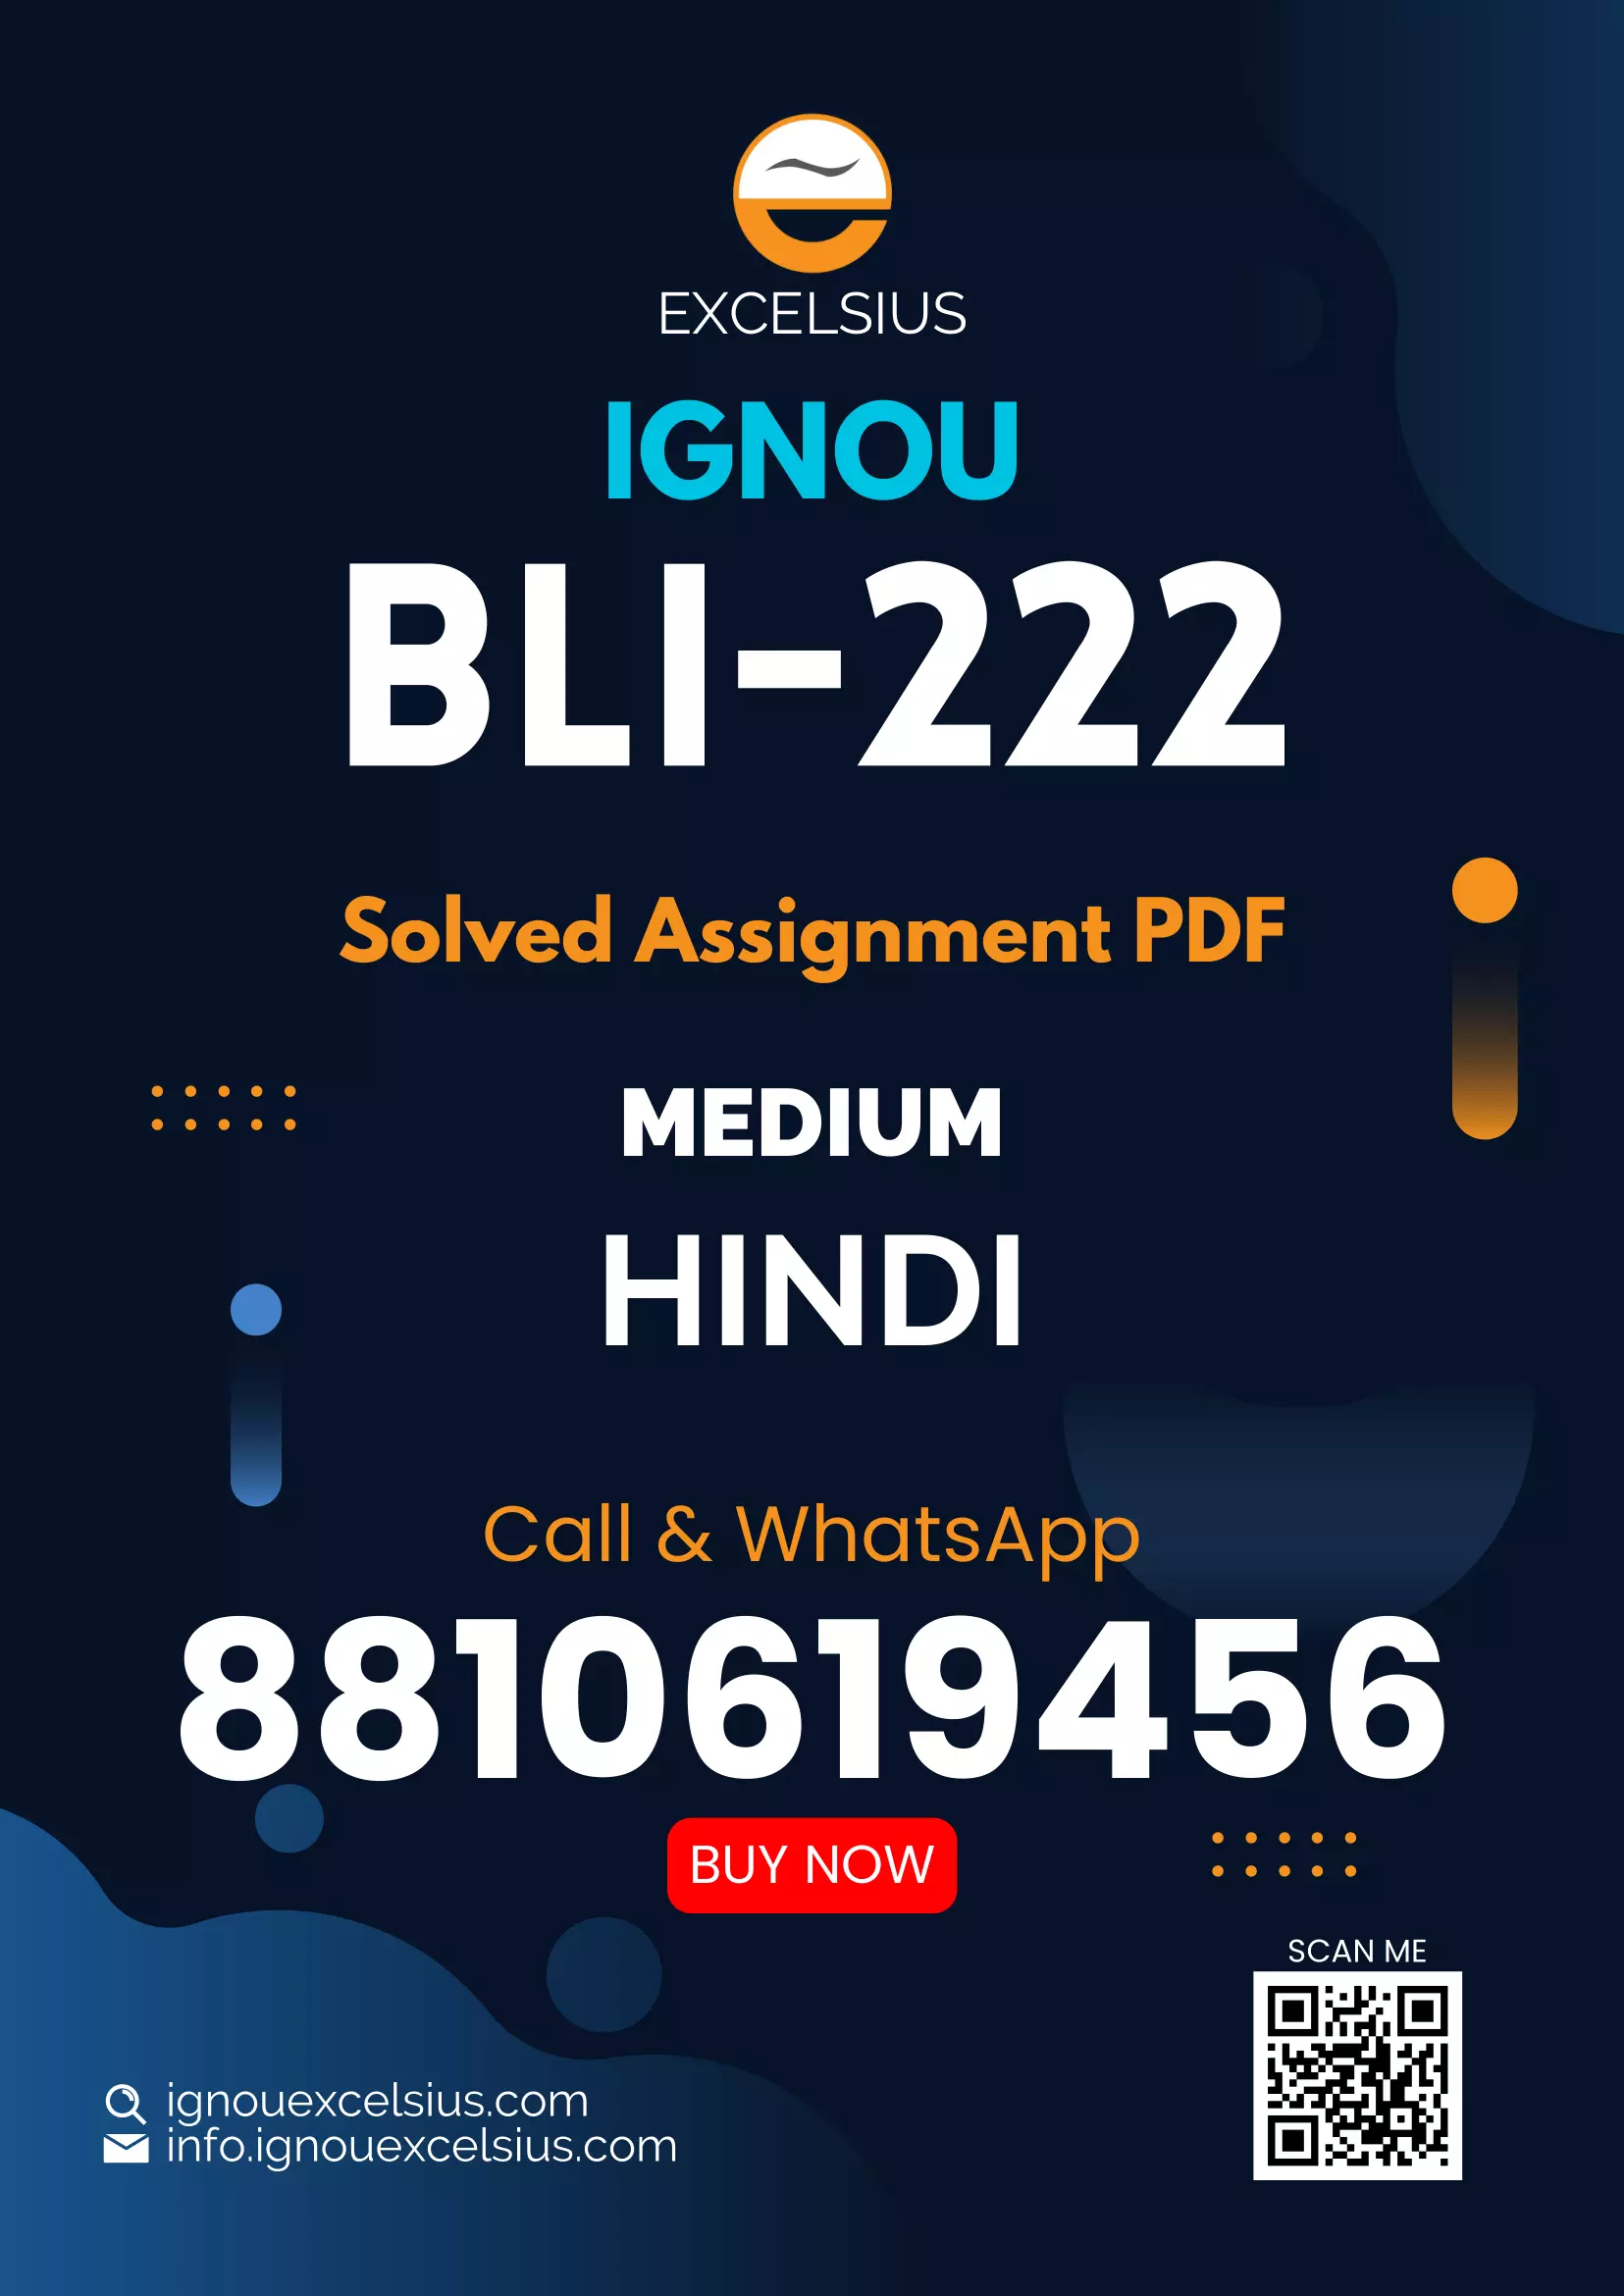 IGNOU BLI-222 - Information Sources and Services, Latest Solved Assignment-July 2022 – January 2023